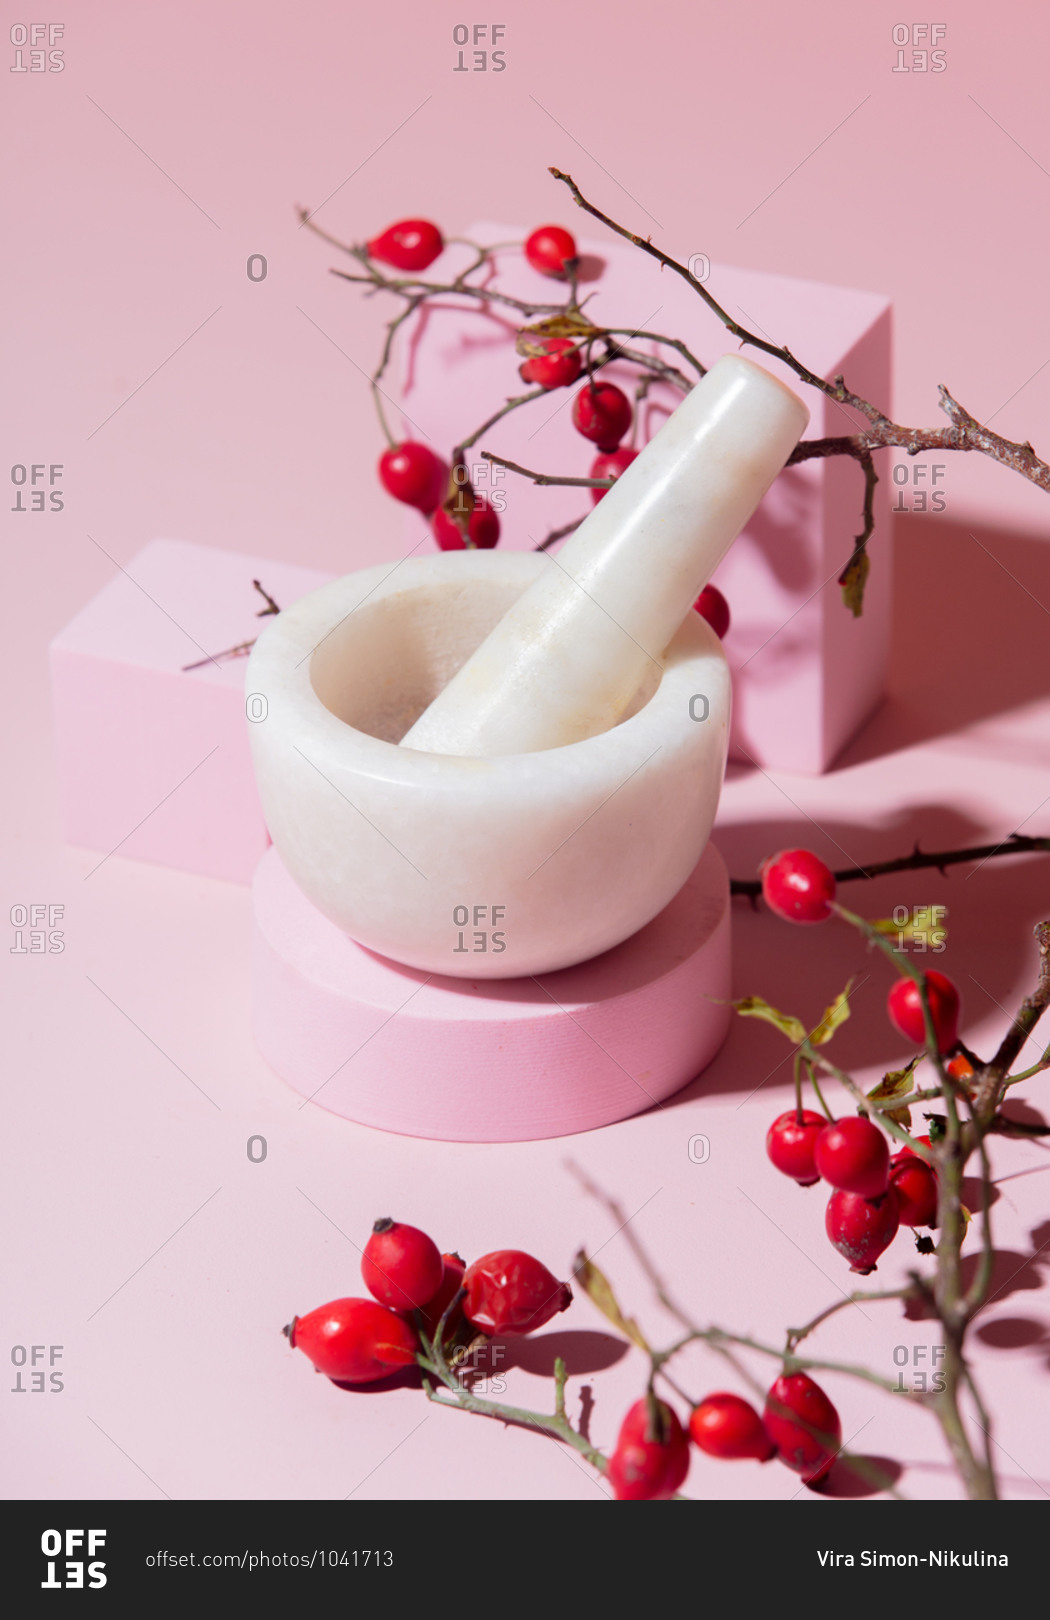 Mortar and pestle with rosehips on pink background